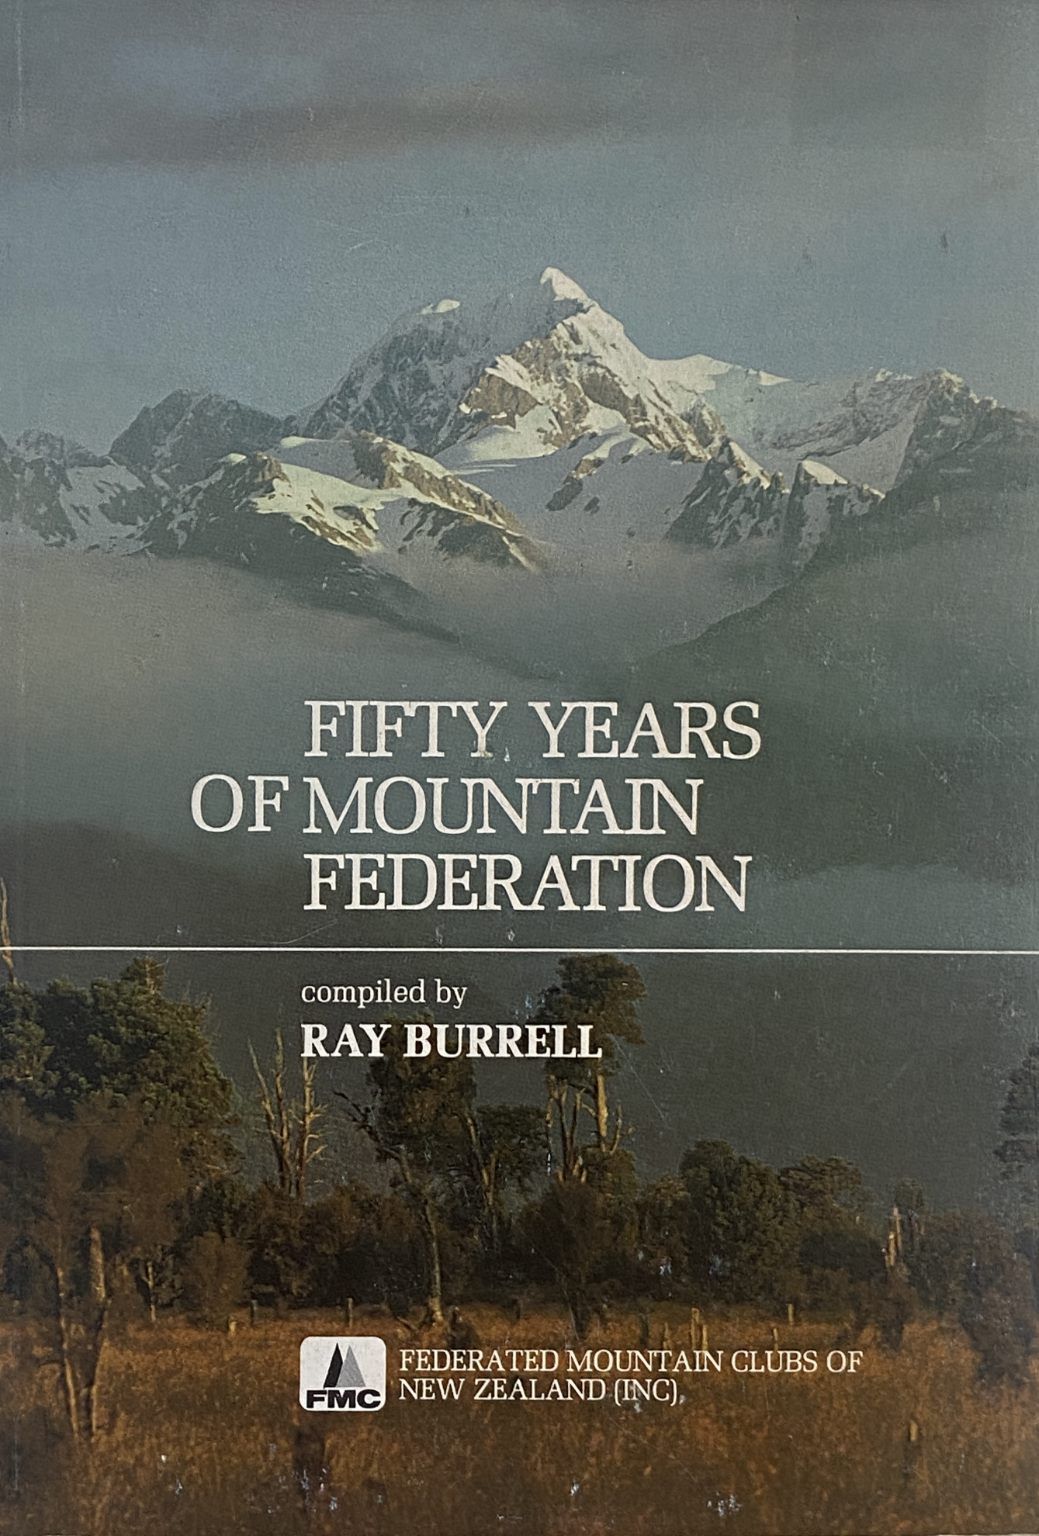 FIFTY YEARS OF MOUNTAIN FEDERATION, 1931-1981